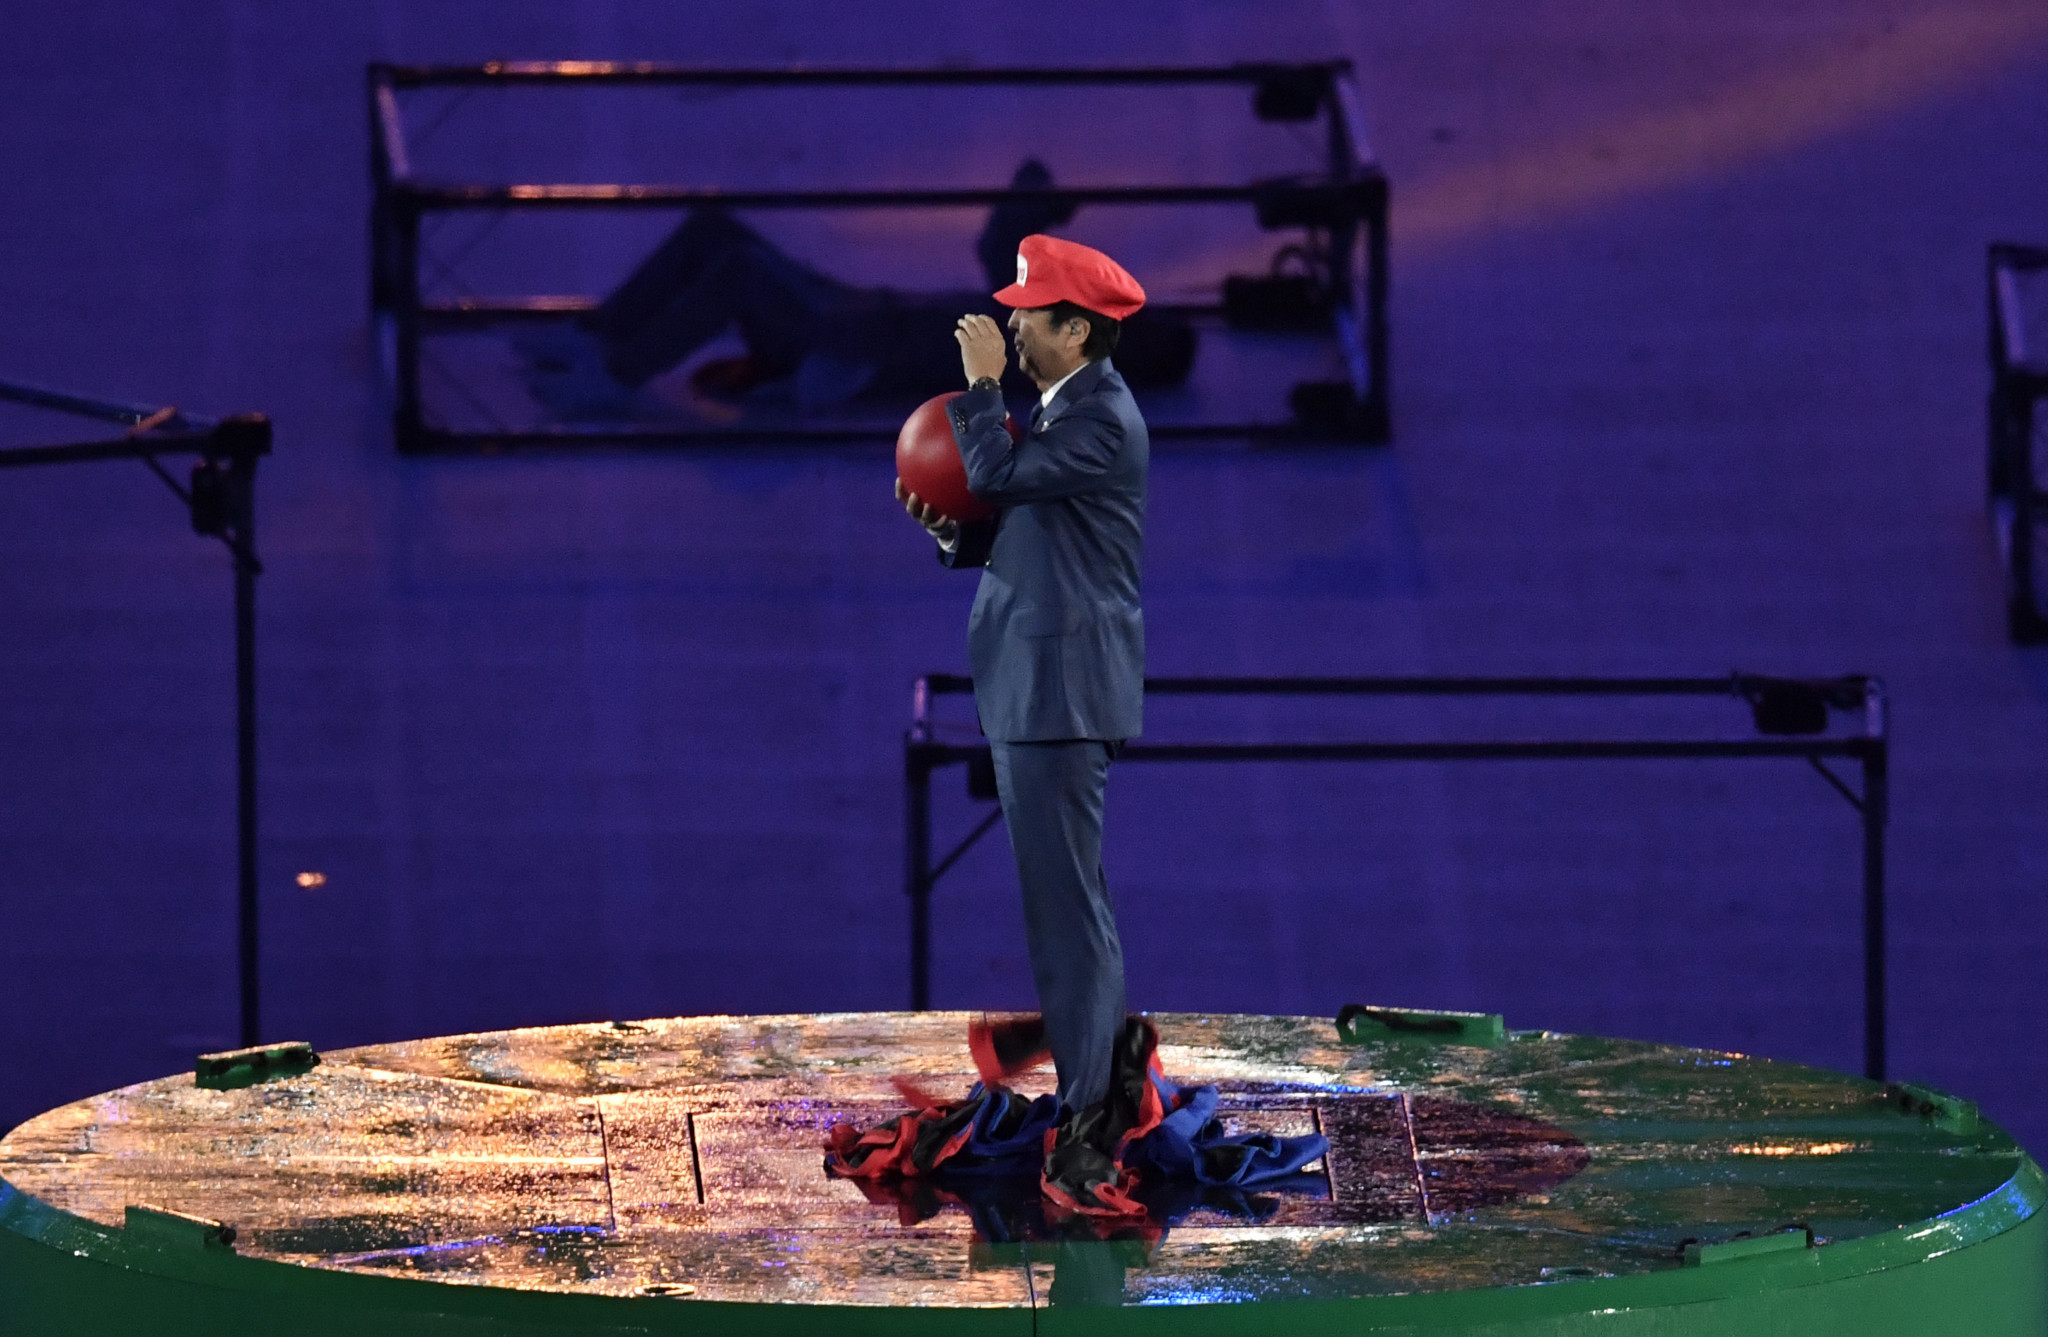 Japanese Prime Minister Shinzō Abe dressed up as Mario at Rio 2016 ©Getty Images